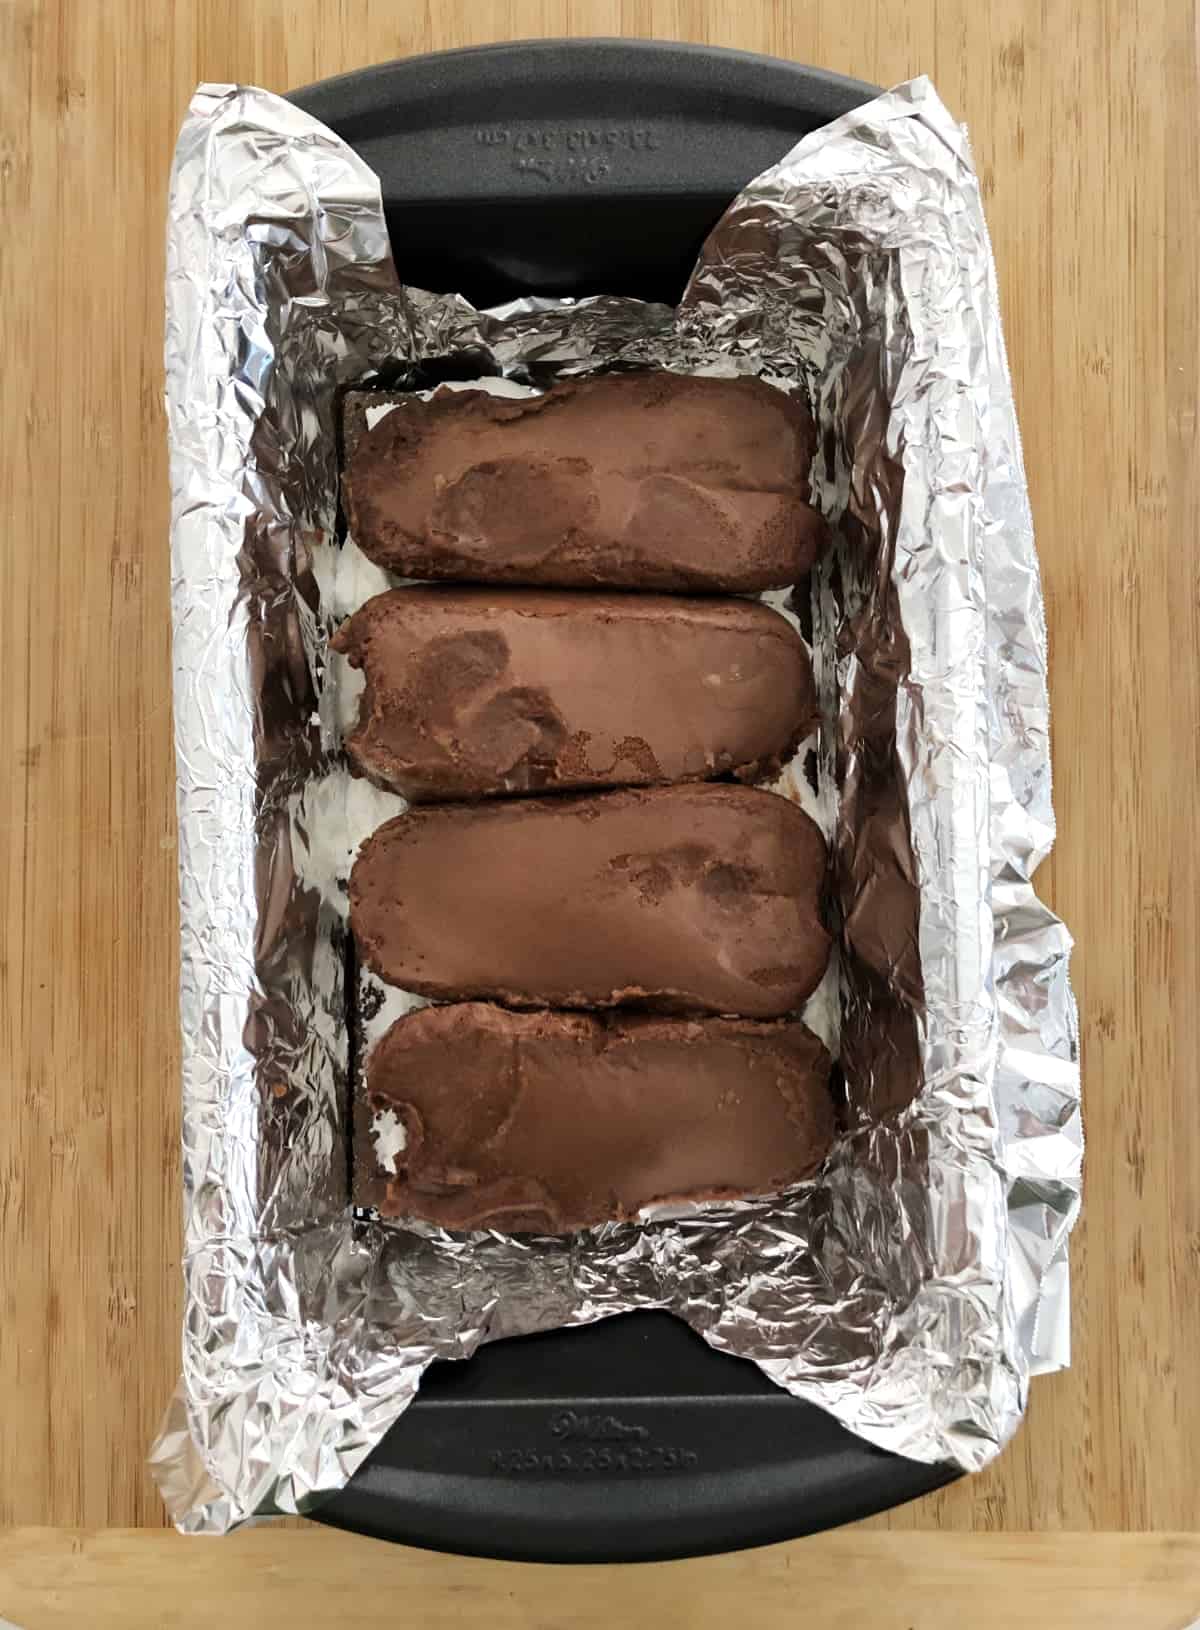 Four chocolate fudge ice cream bars side-by-side in foil lined loaf pan.